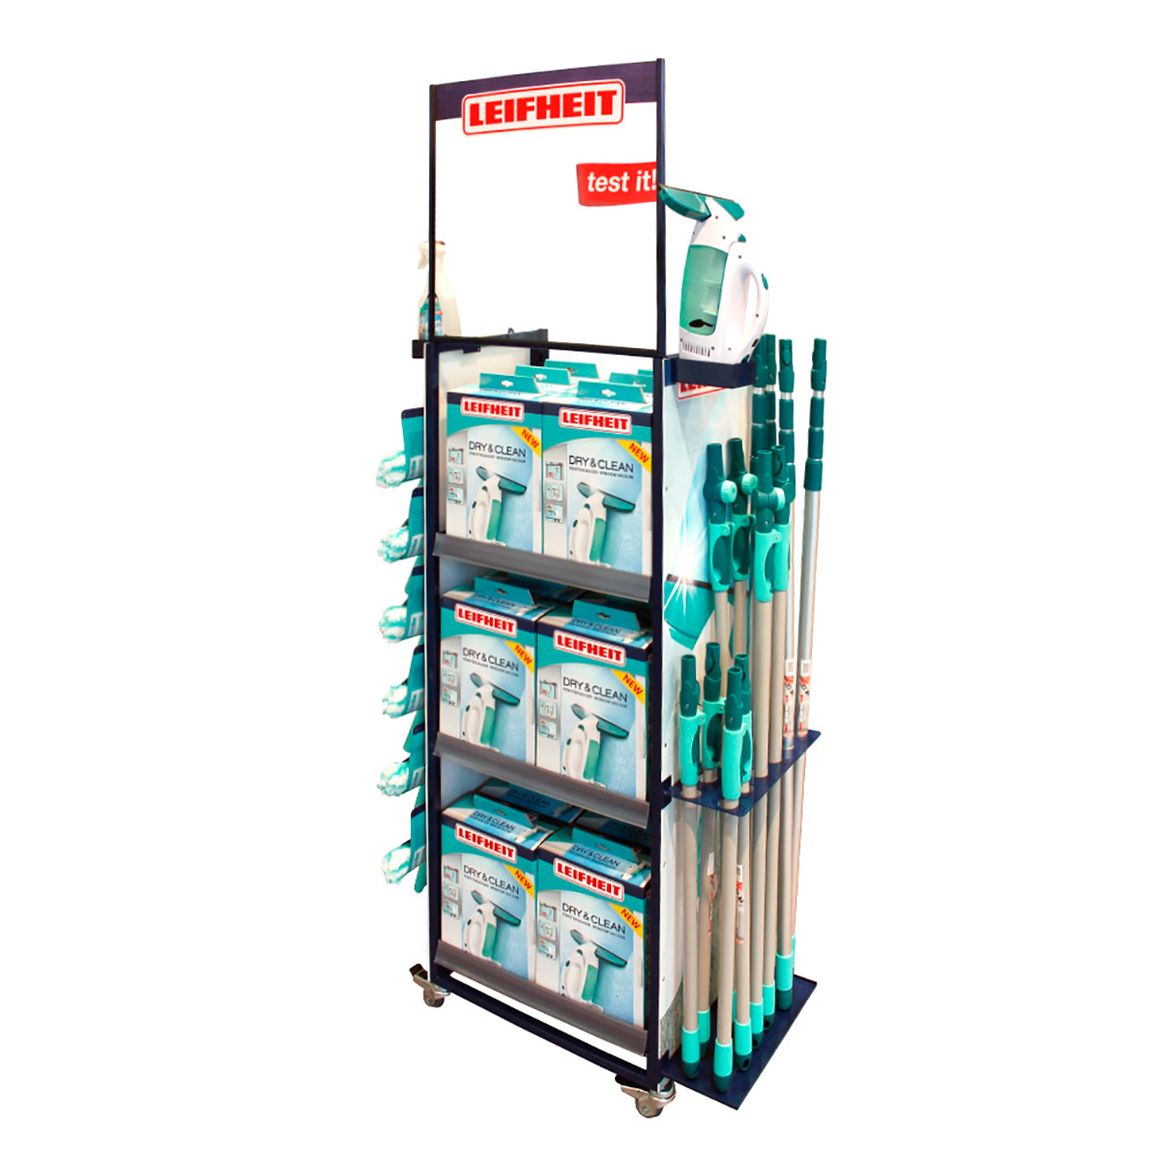 Product display for Leifheit